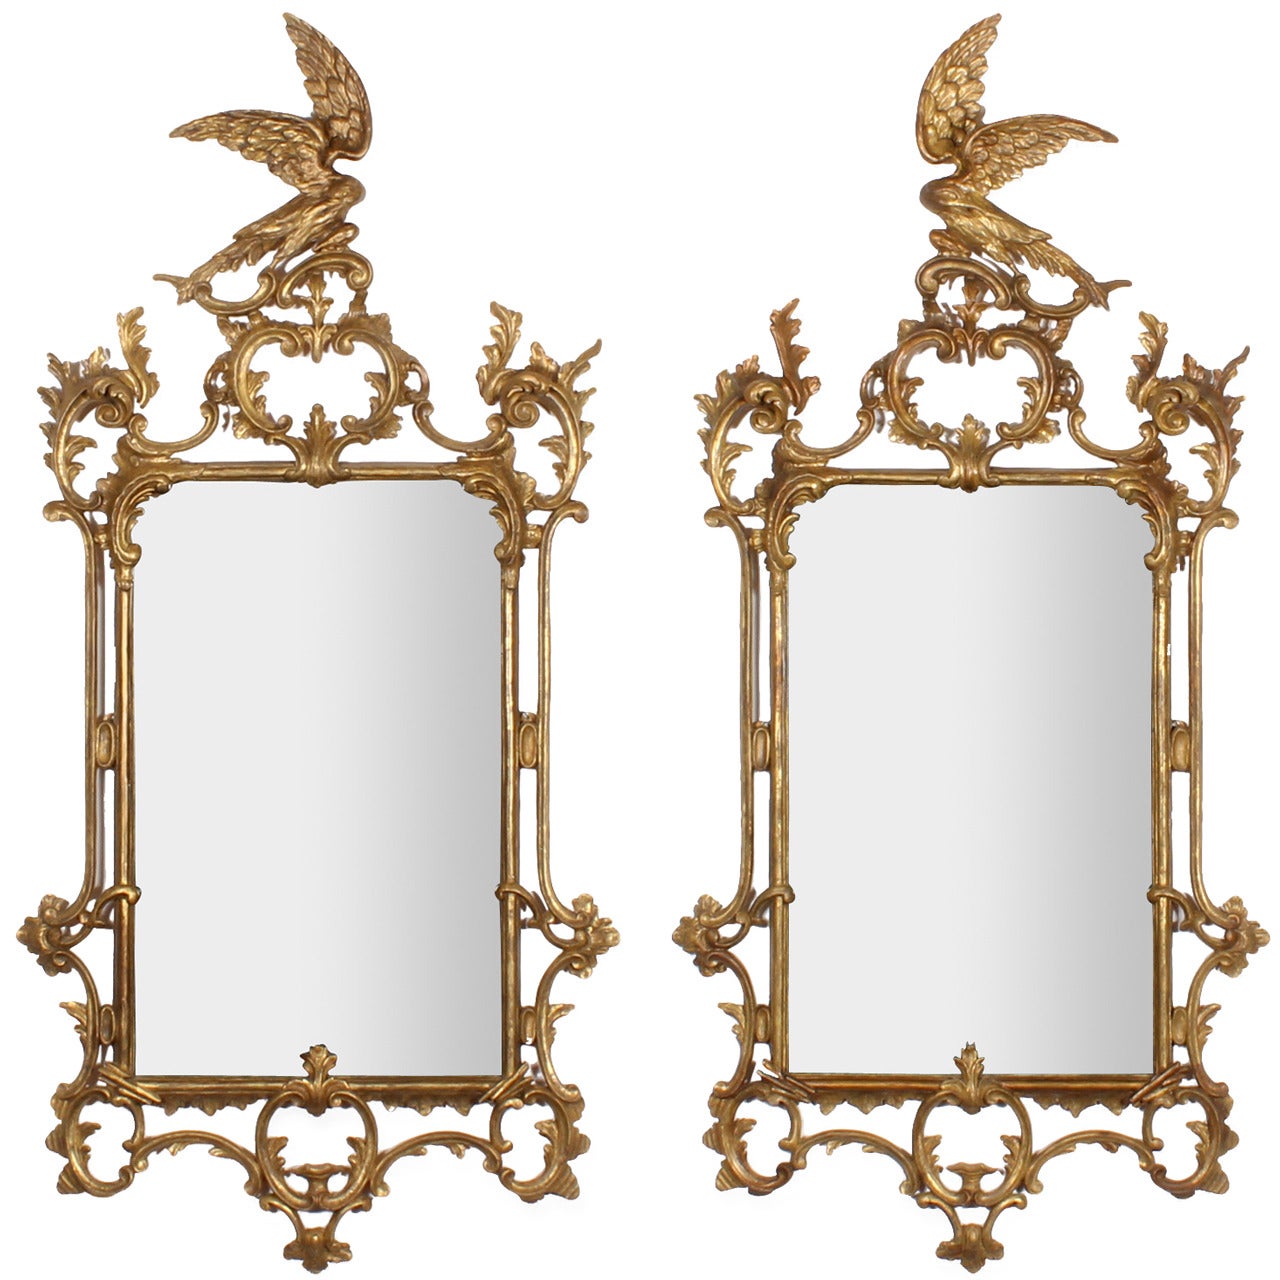 Rare Pair of Late 18th- Early 19th Century Carved Gilt Georgian Mirrors